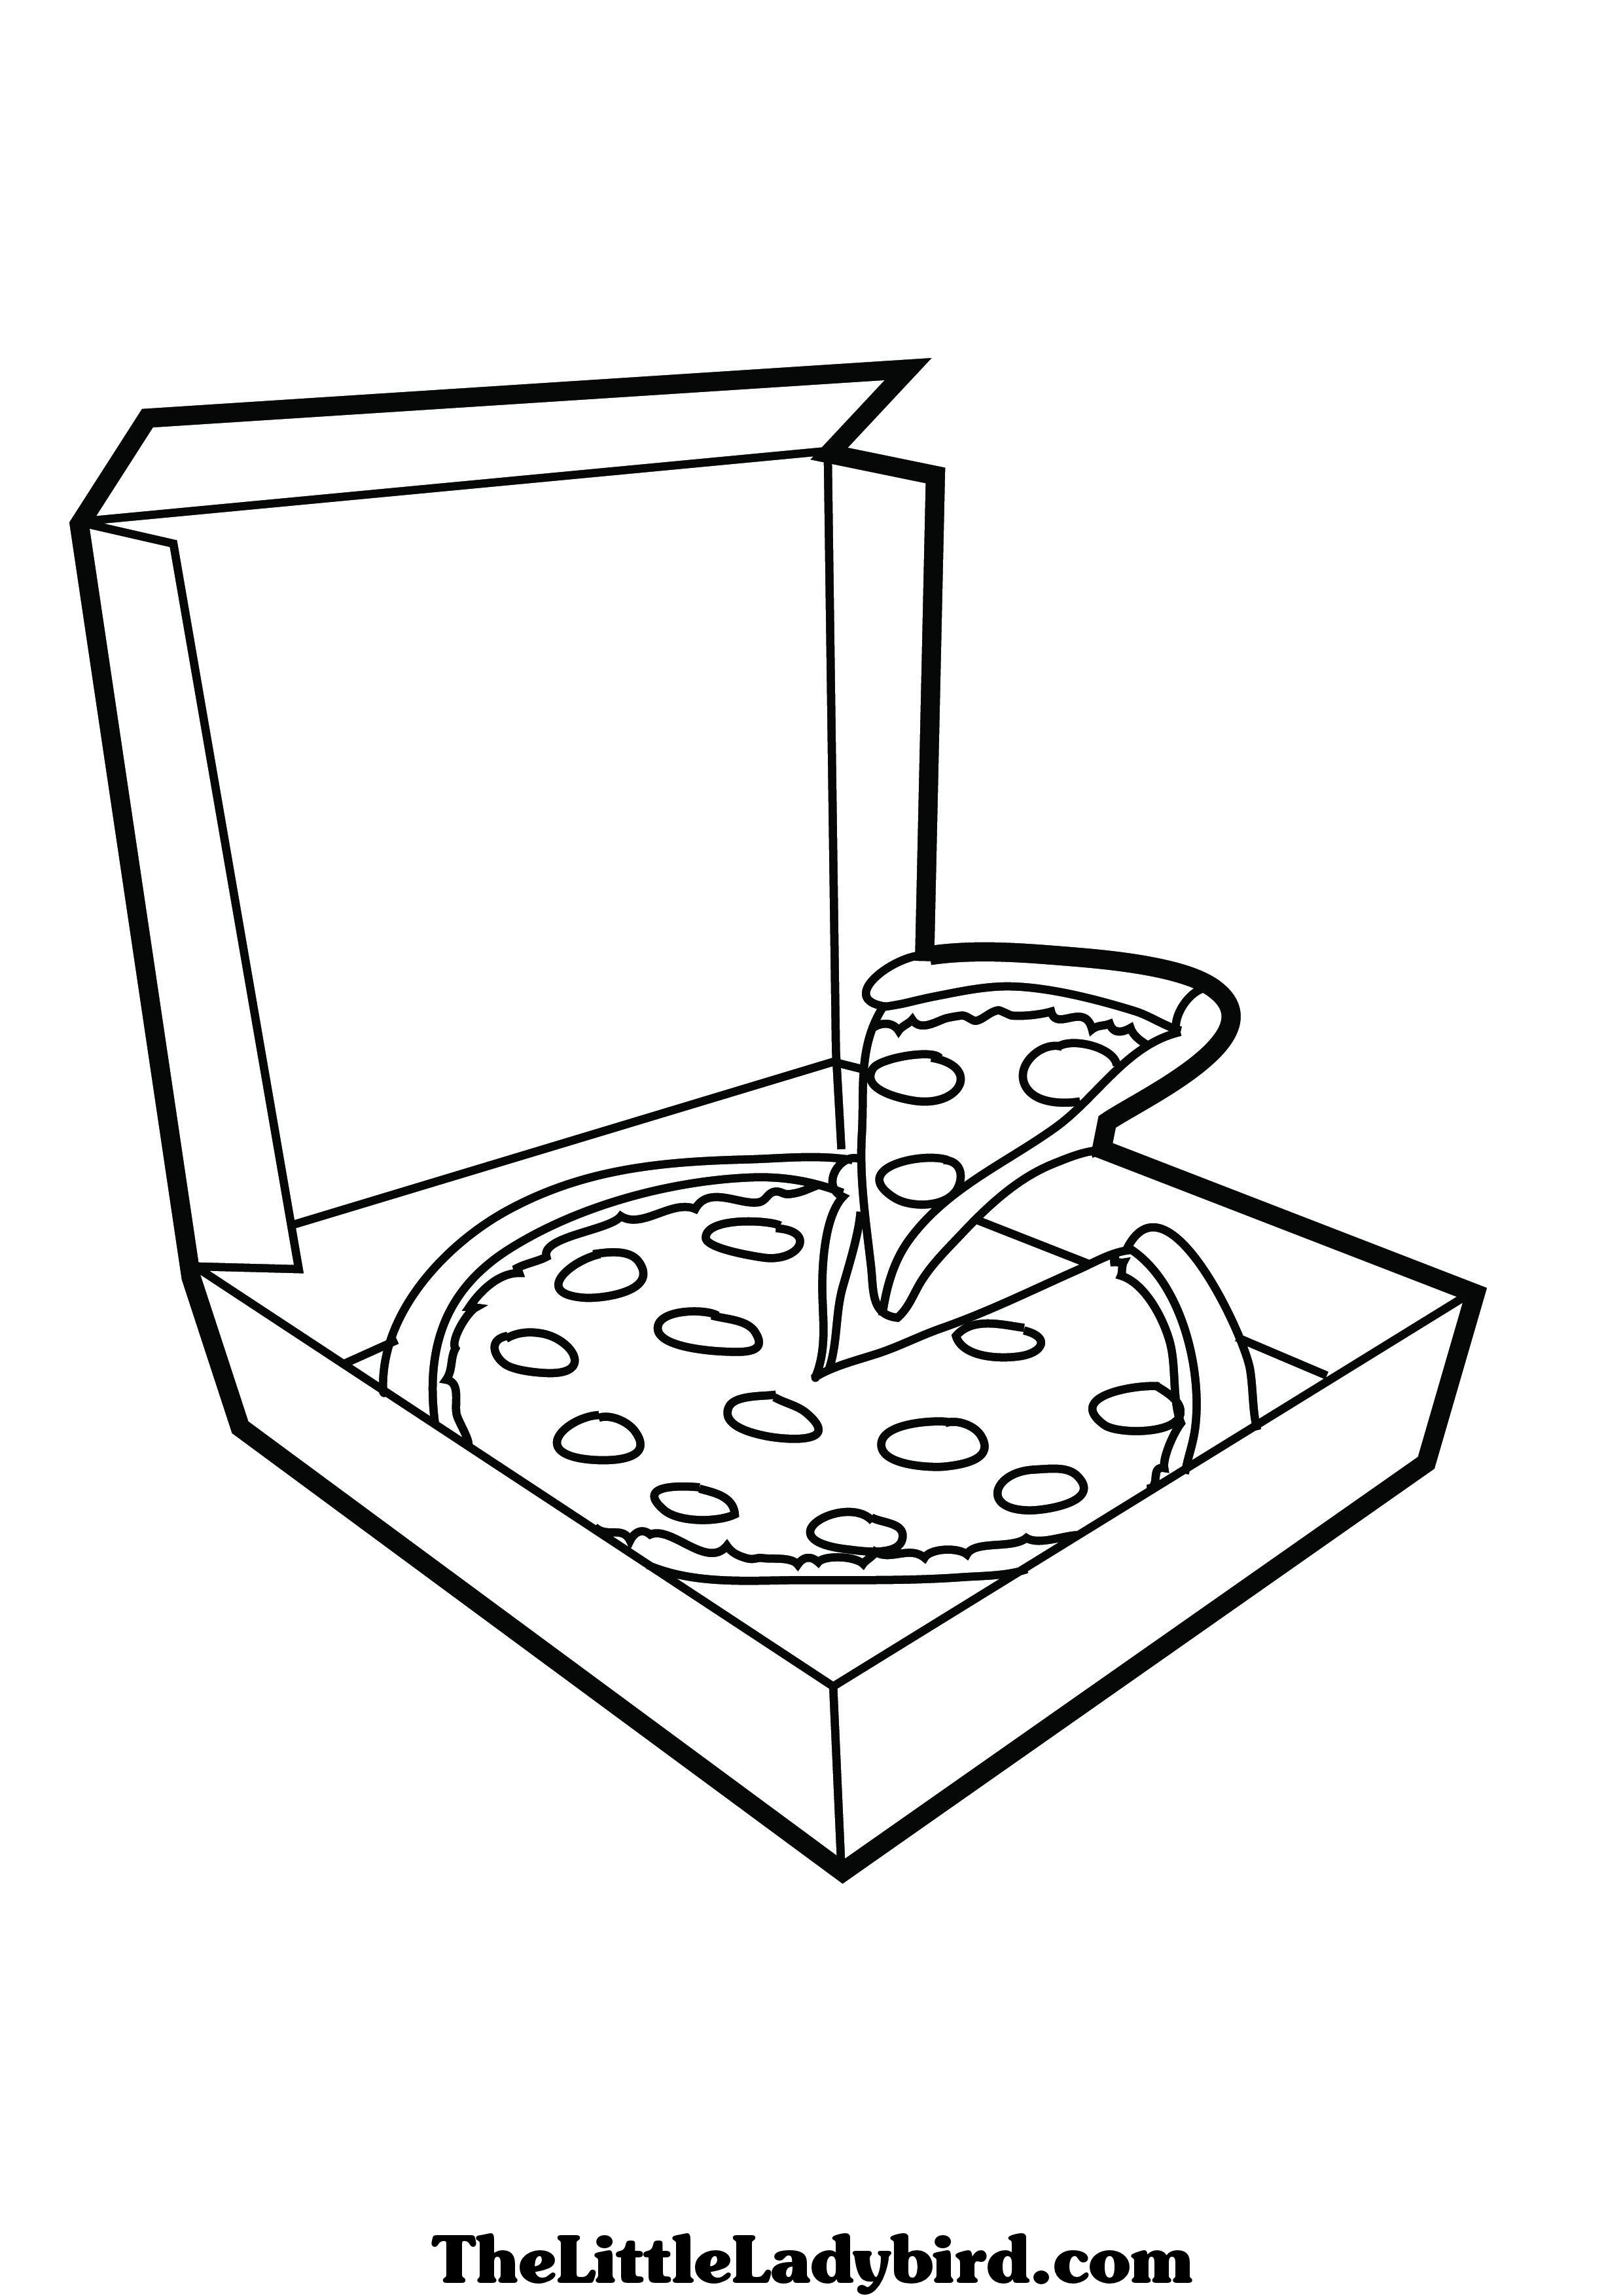  Pizza coloring pages | kids printable coloring pages | #21